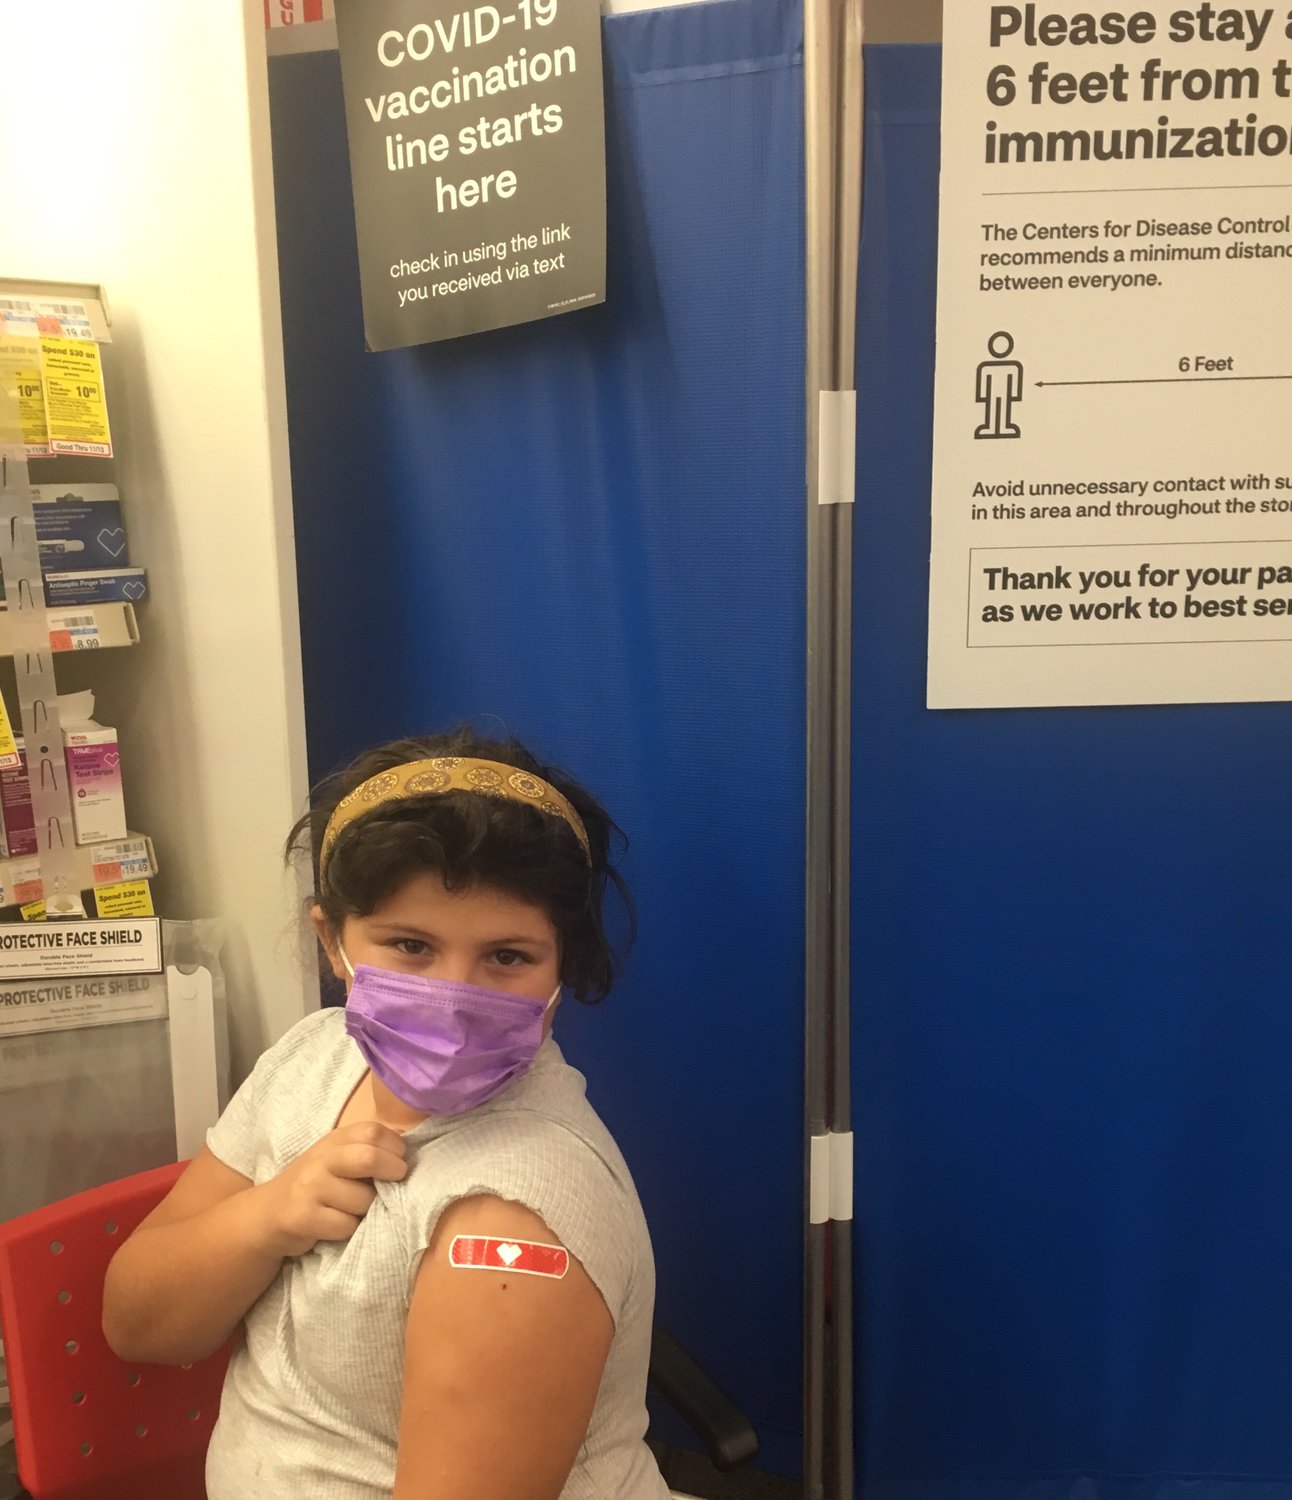 Juliette Castronovo, 7, got the first dose of the Covid vaccine on Monday.